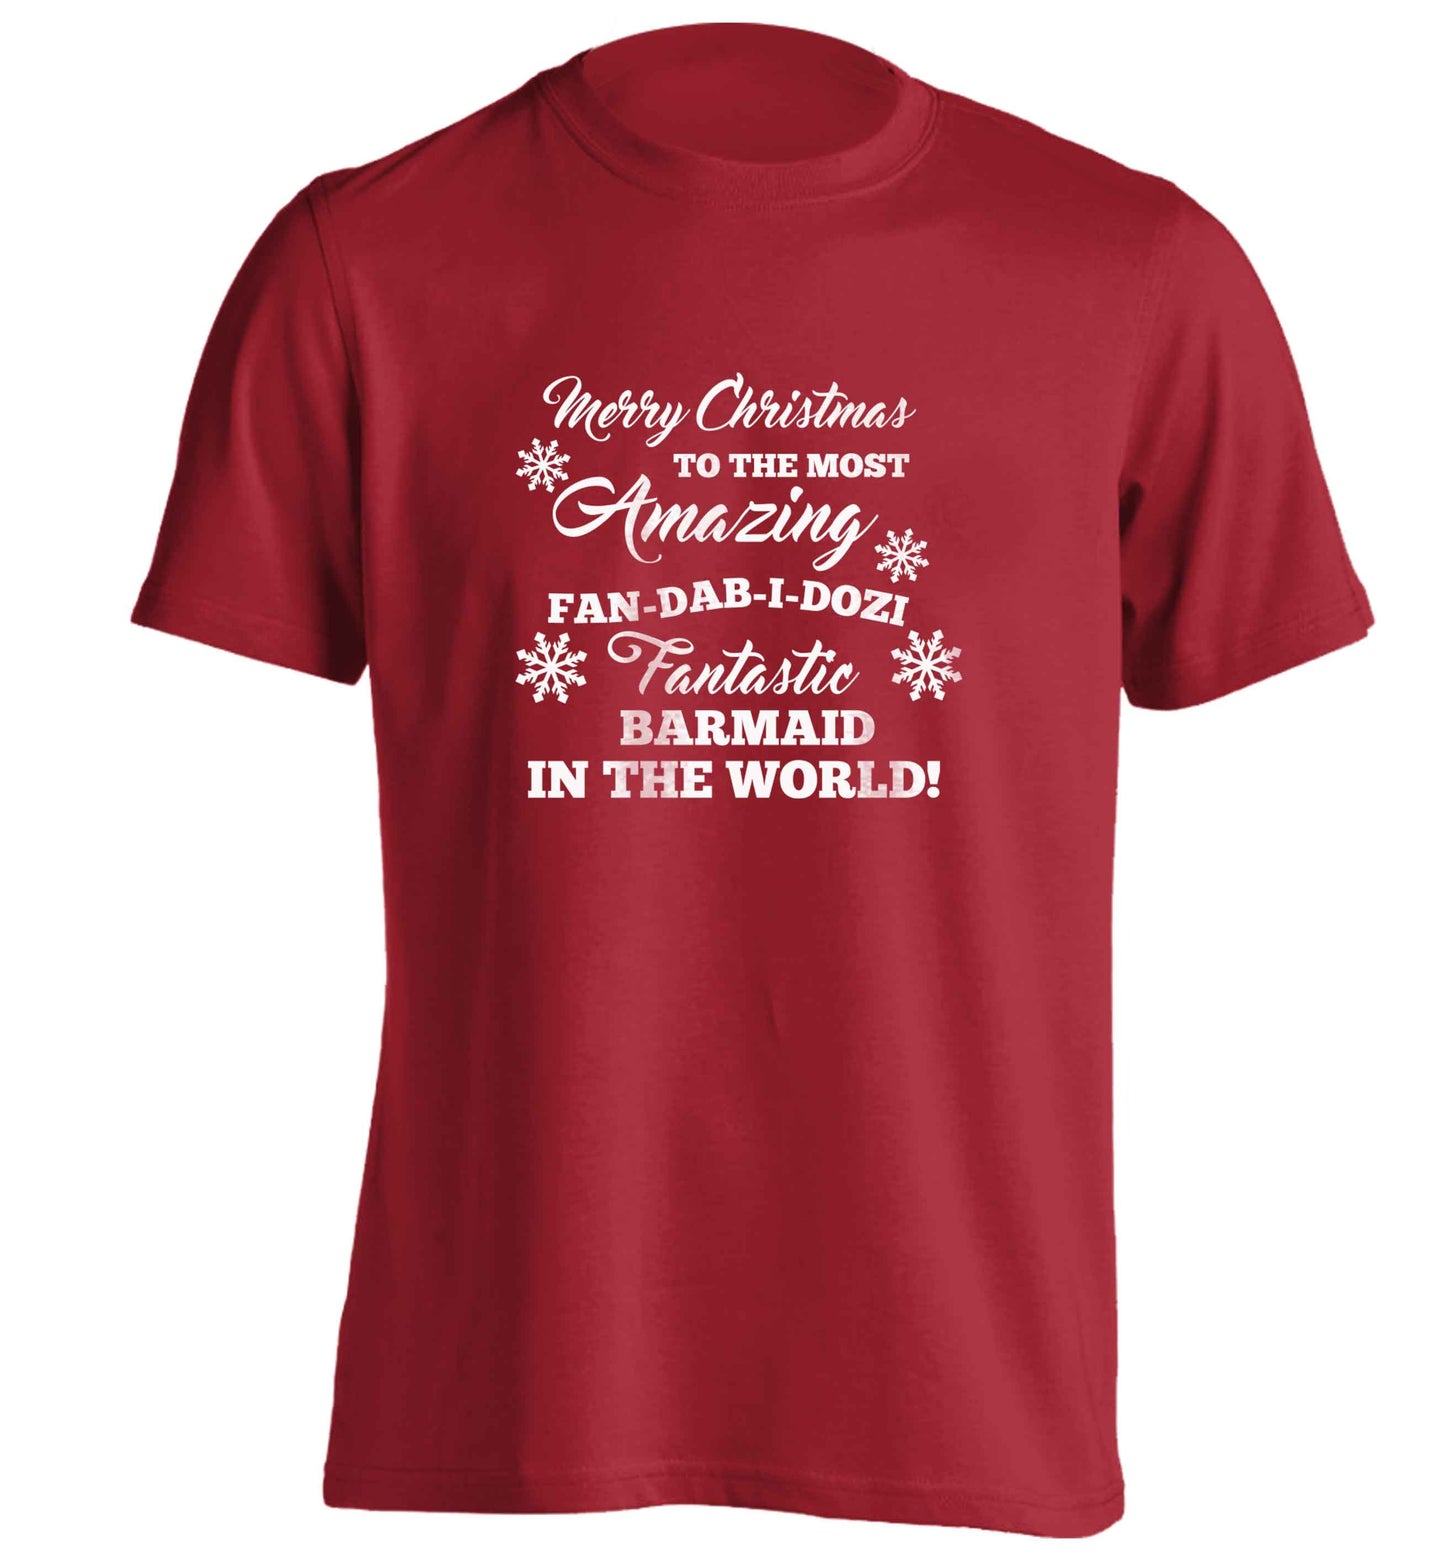 Merry Christmas to the most amazing barmaid in the world! adults unisex red Tshirt 2XL